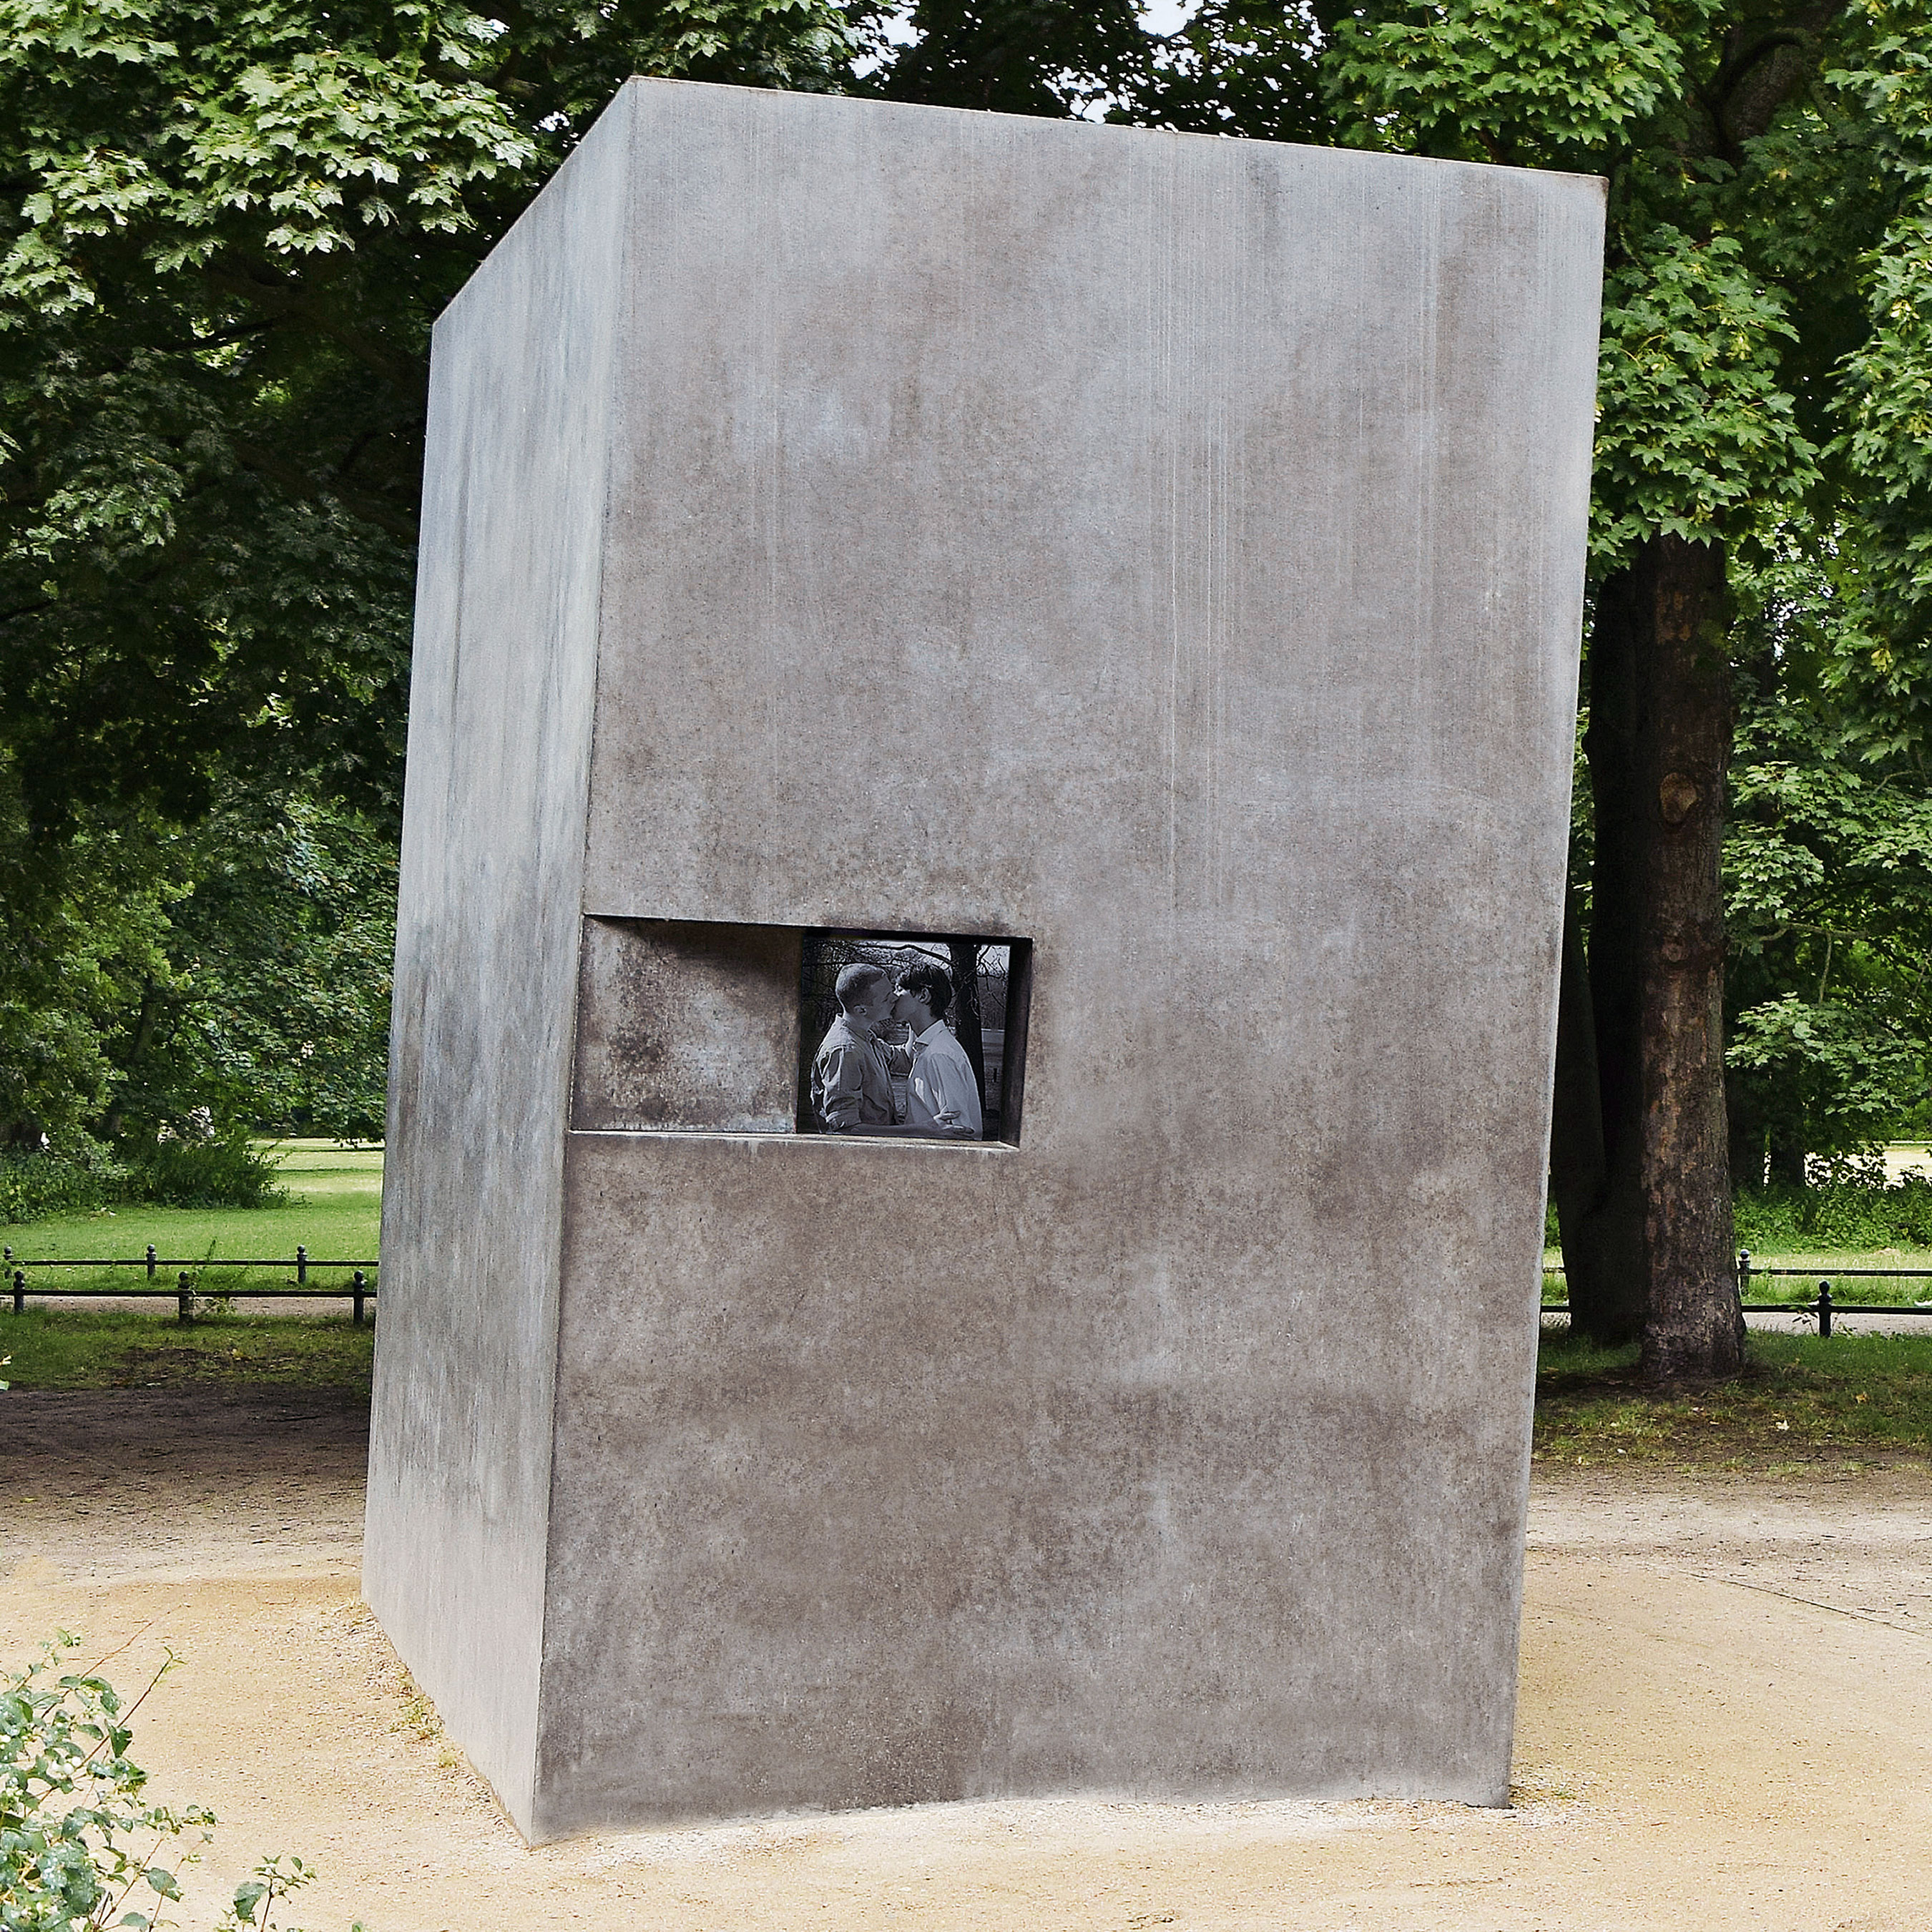 Memorial to the Homosexuals Persecuted Under the National Socialist Regime, Germany, Berlin, Germany. Elmgreen & Dragset (2008). Picture credit: Elmgreen & Dragset Memorial to the Homosexuals Persecuted under the National Socialist Regime, 2008,